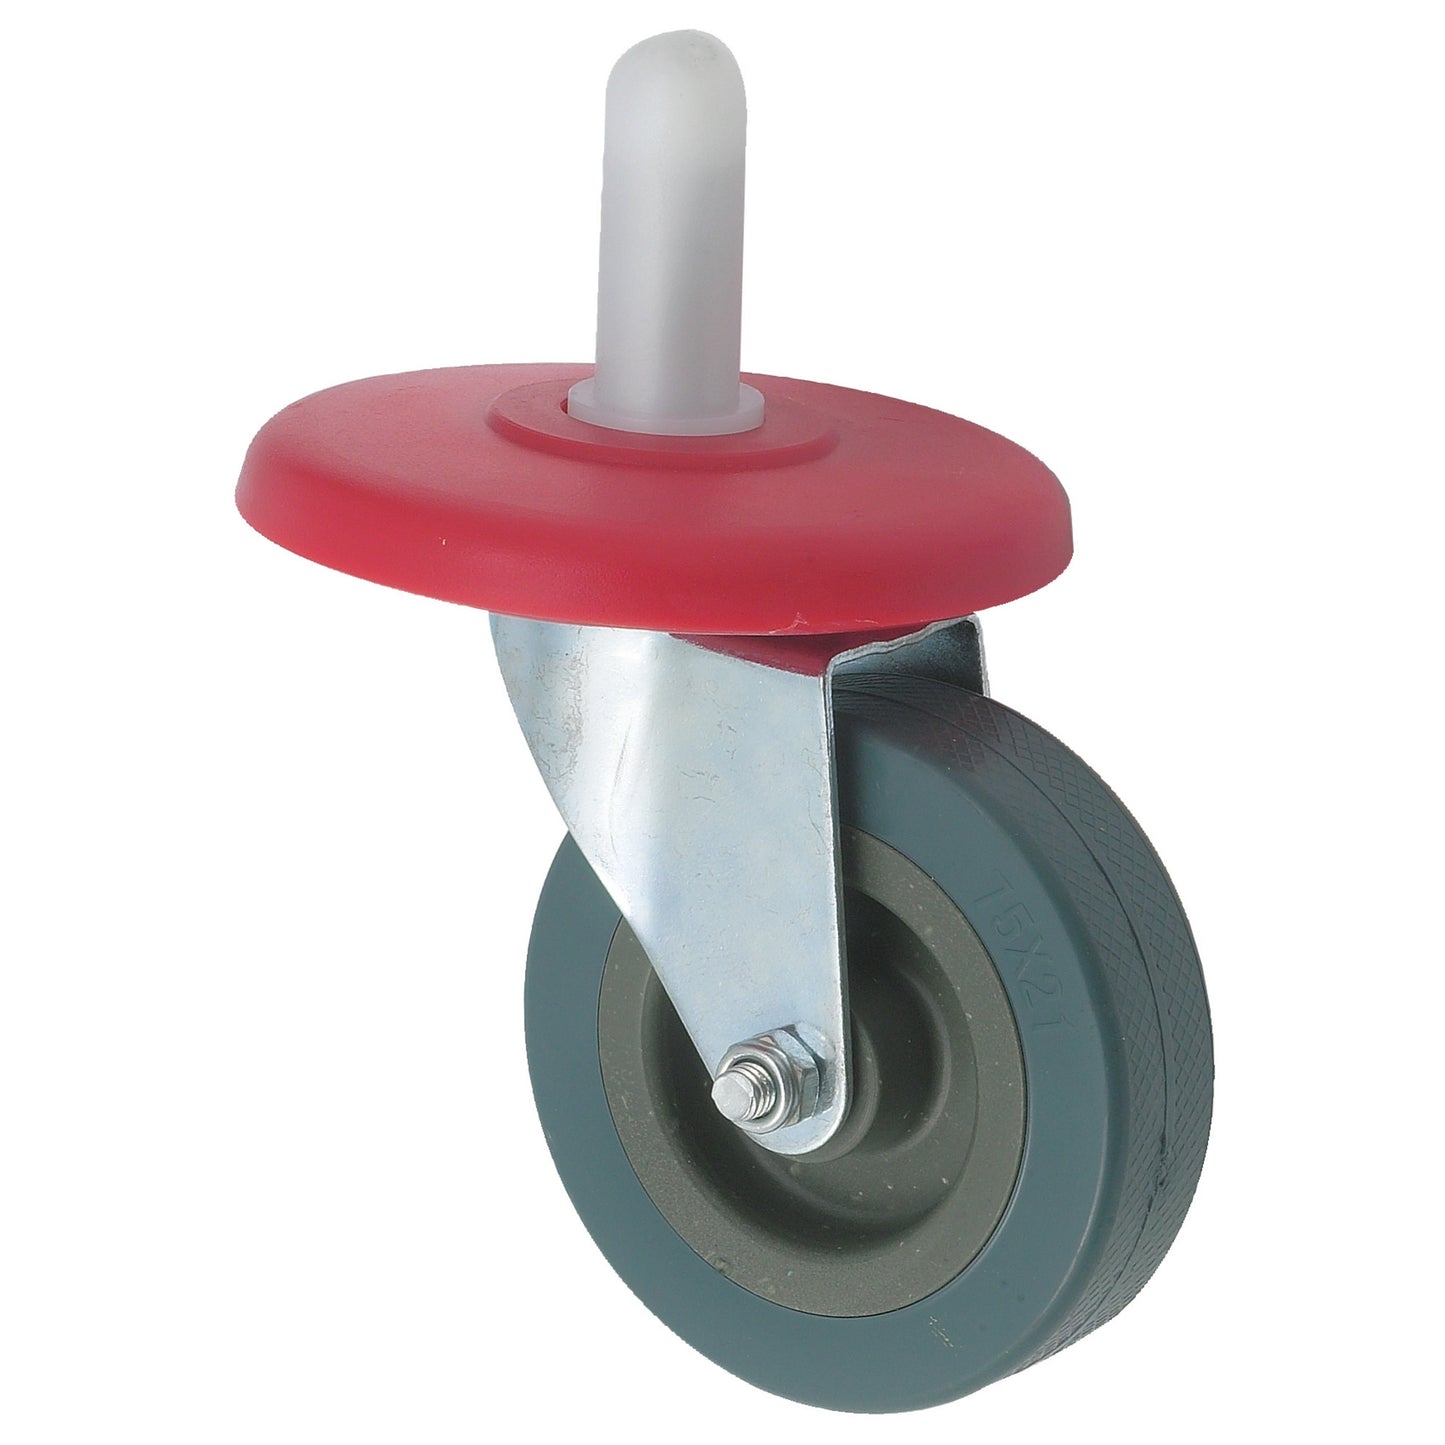 MPB-36WH - Caster with Bumper for MPB-36 Mop Bucket